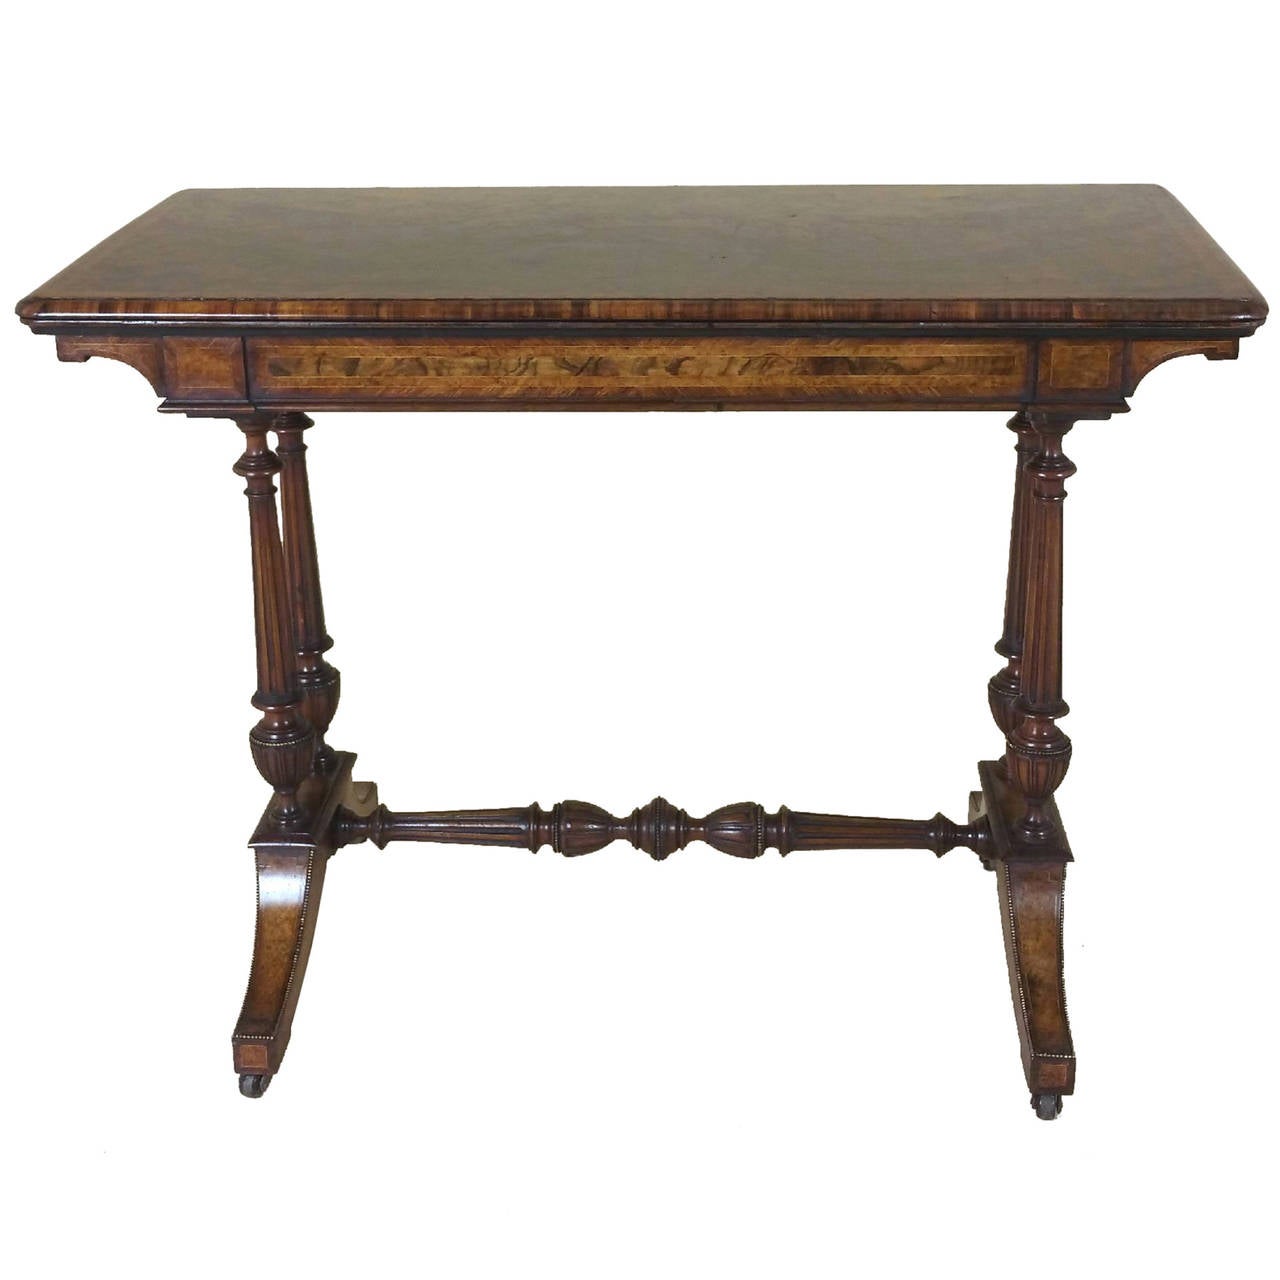 19th C. Figured Walnut Fold Over Card Table by Lamb of Manchester For Sale